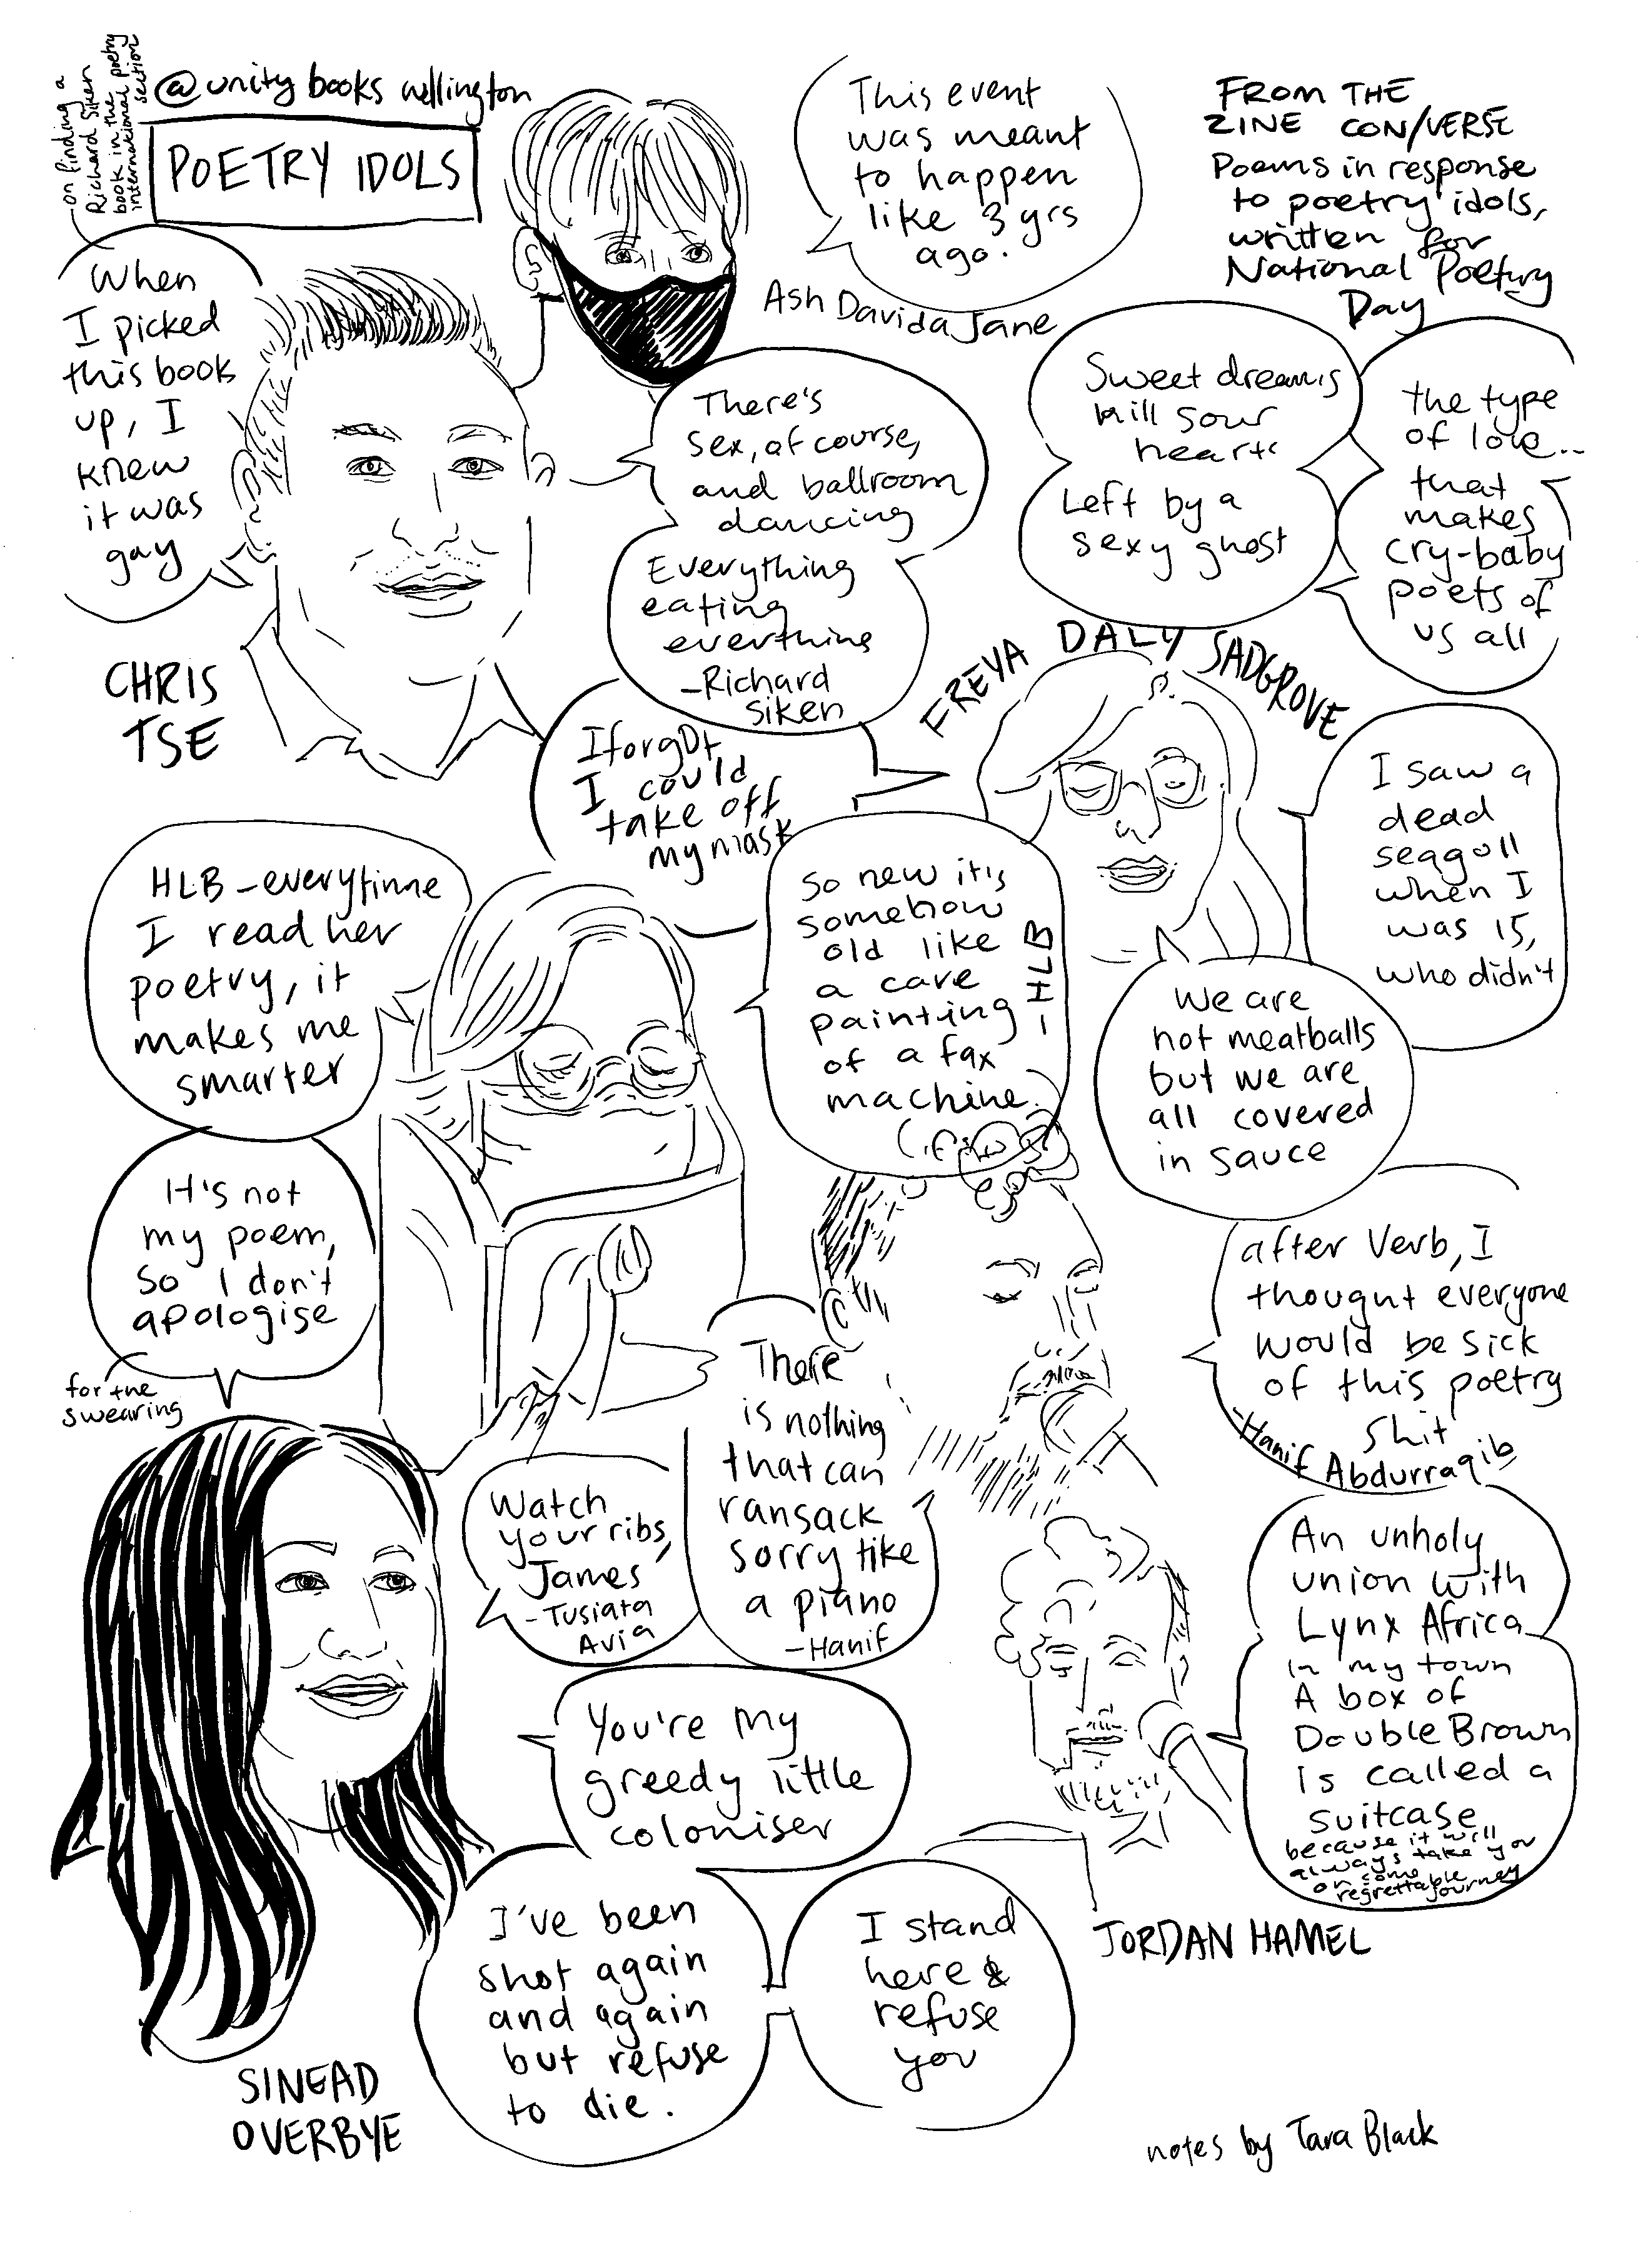 Cartoon heads with quotes from the talk